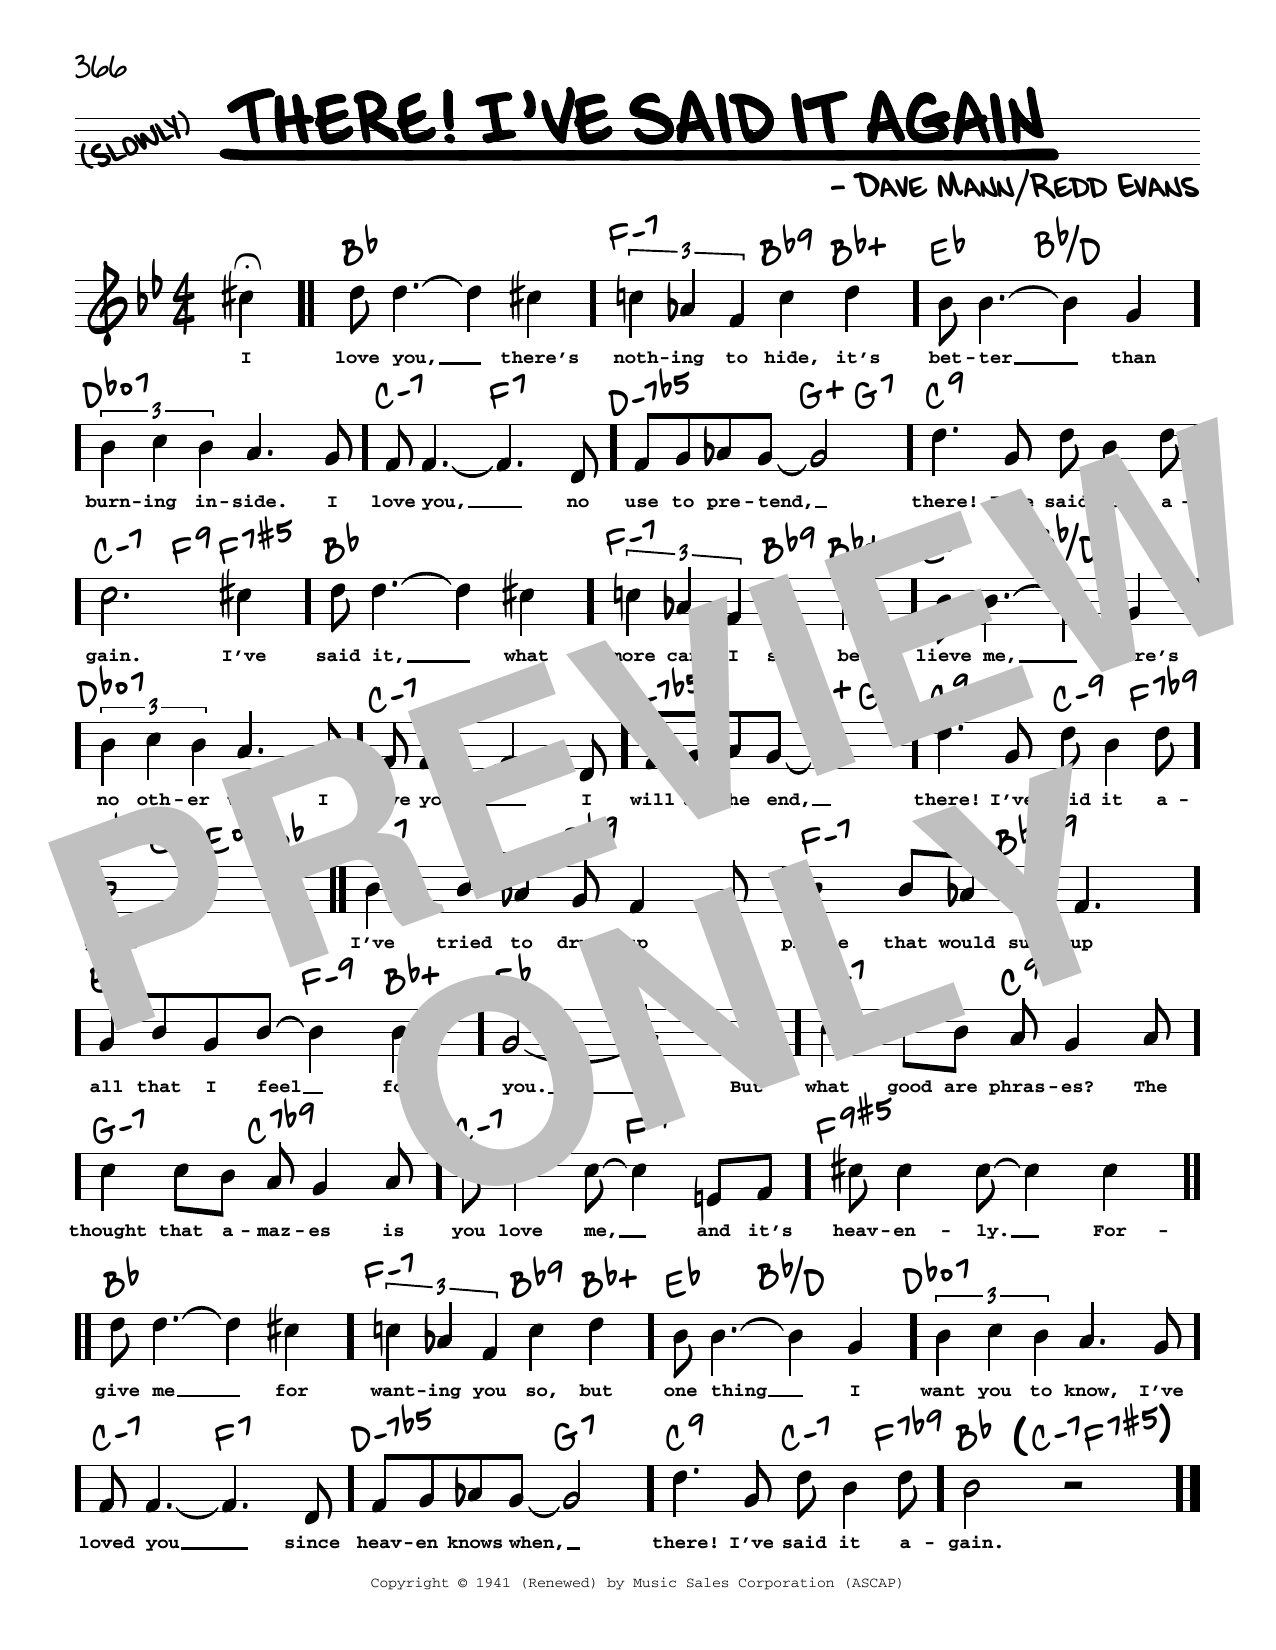 Download Dave Mann There! I've Said It Again (High Voice) Sheet Music